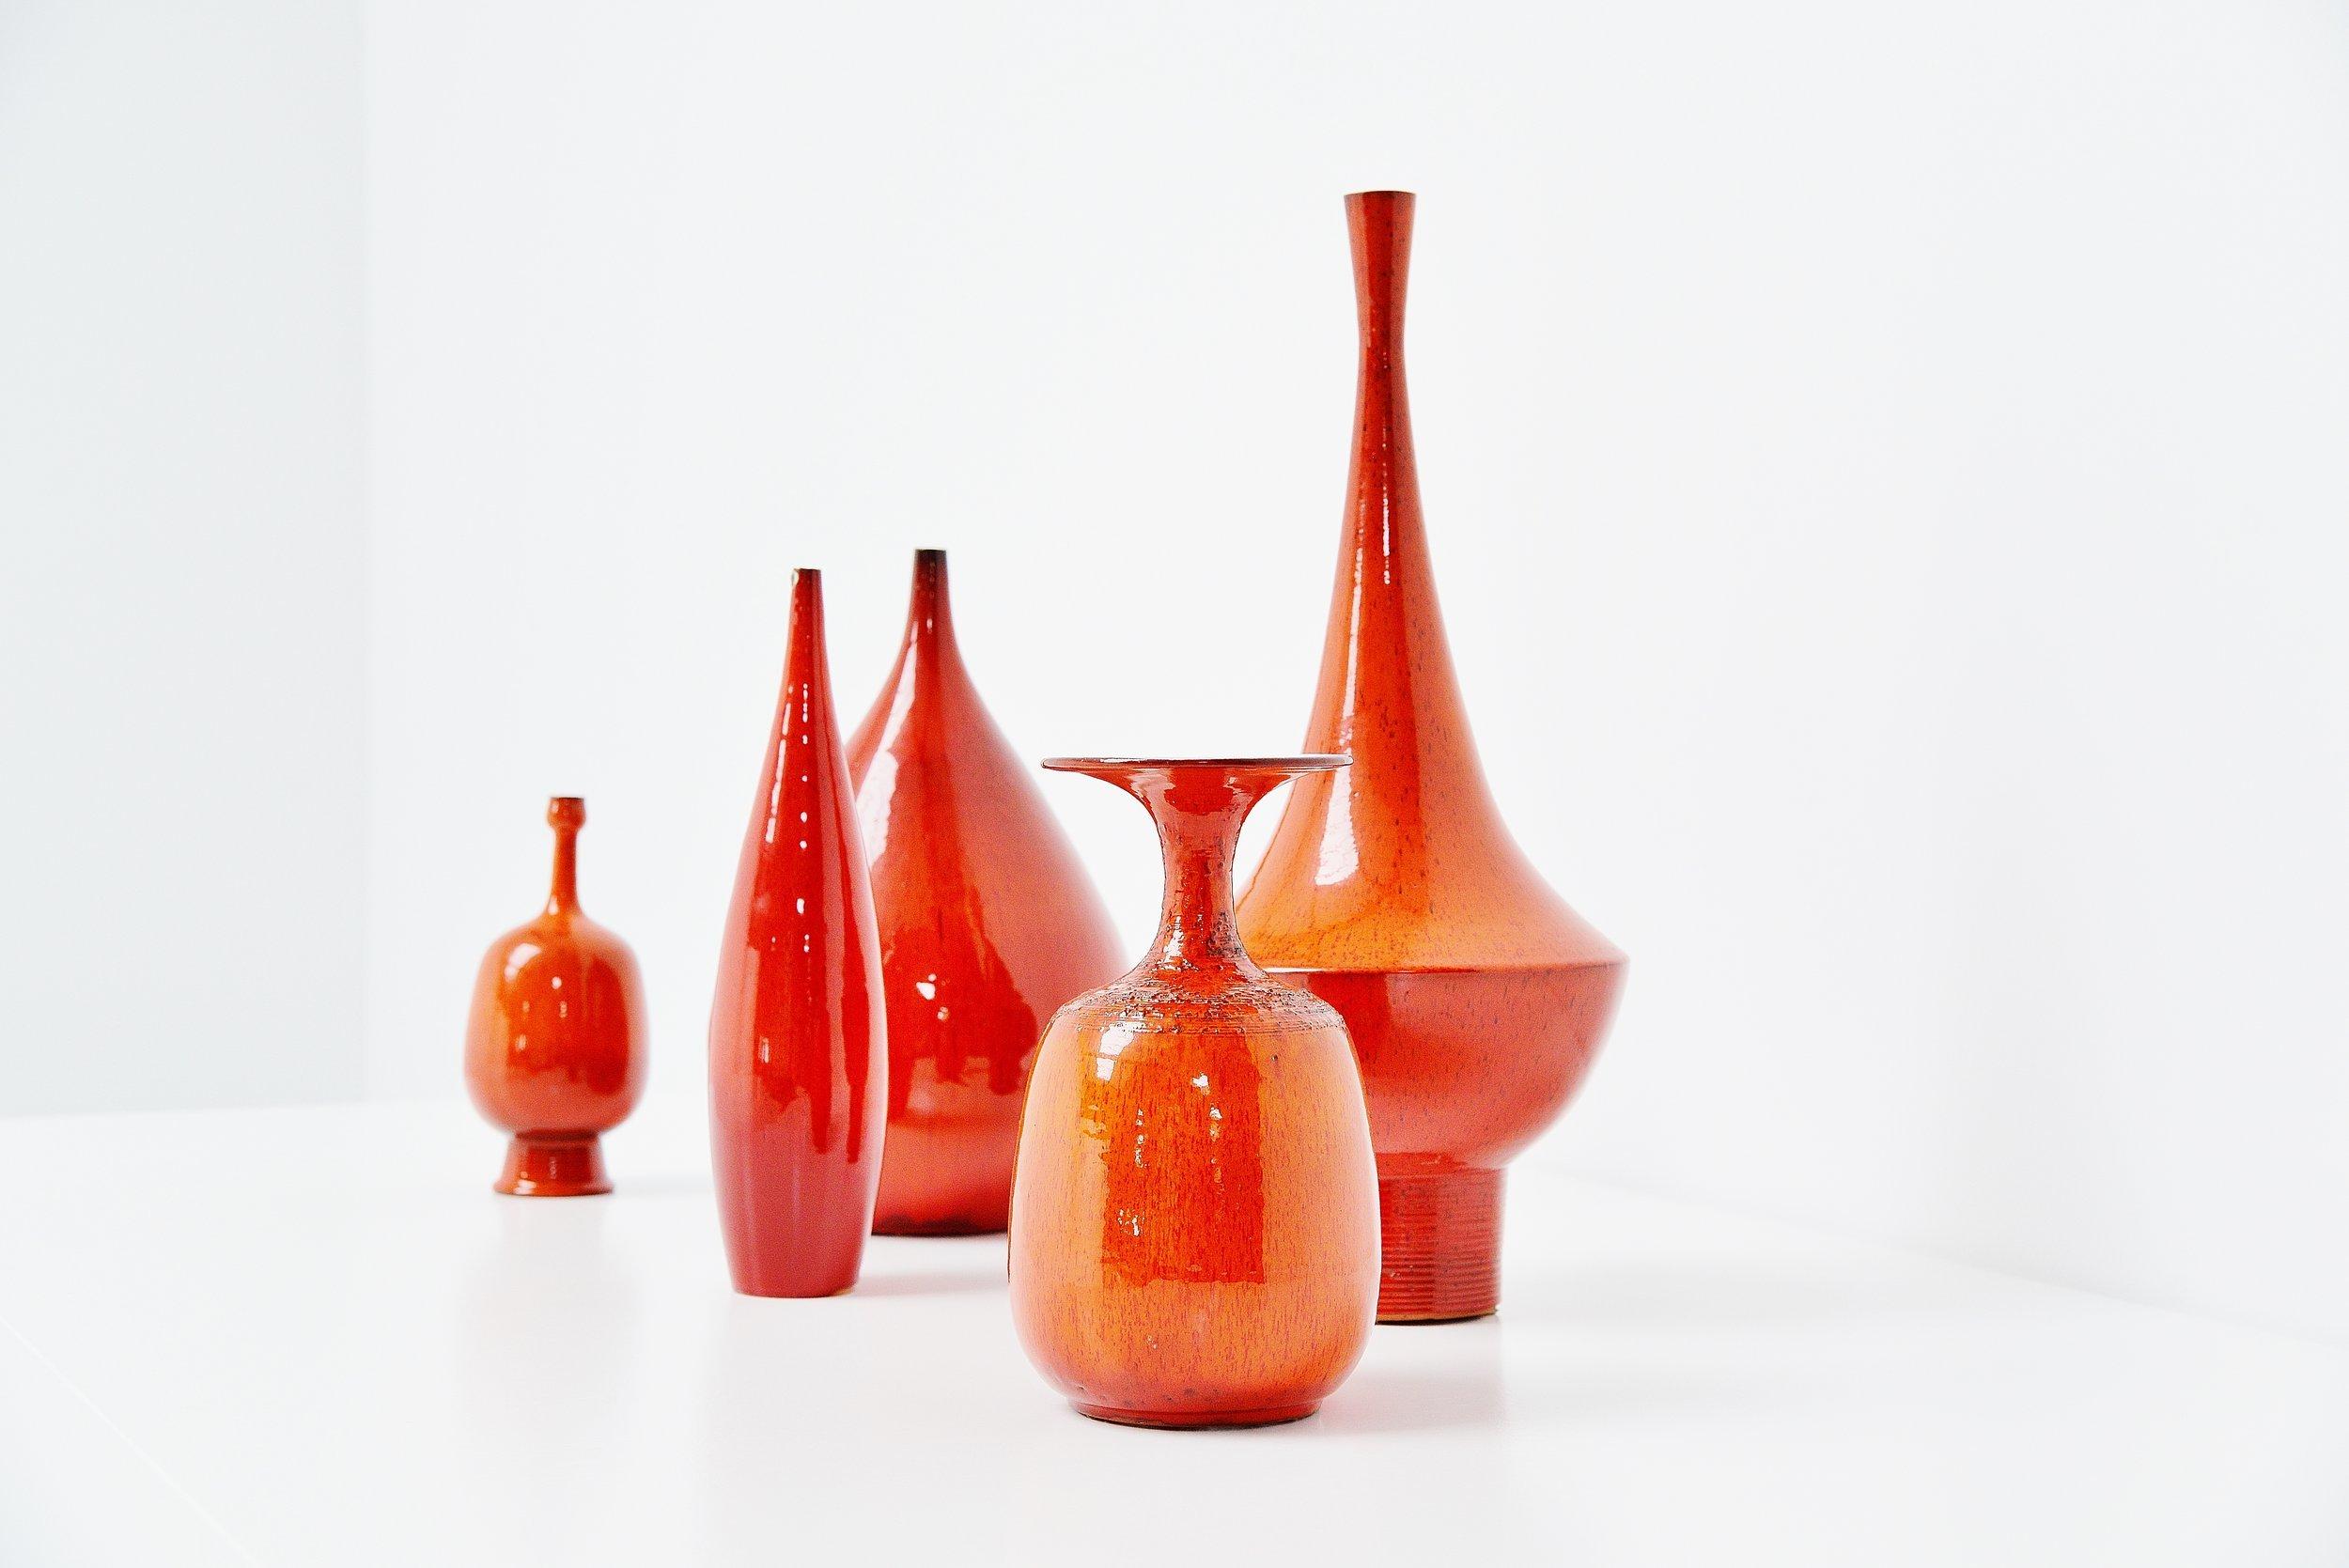 Highly decorative and very large sized ceramic vases set (5) designed by Rogier Vandeweghe and manufactured by Amphora, Belgium 1963. These vases have an amazing unusual shape and nice red/orange glaze and would look highly decorative in any modern